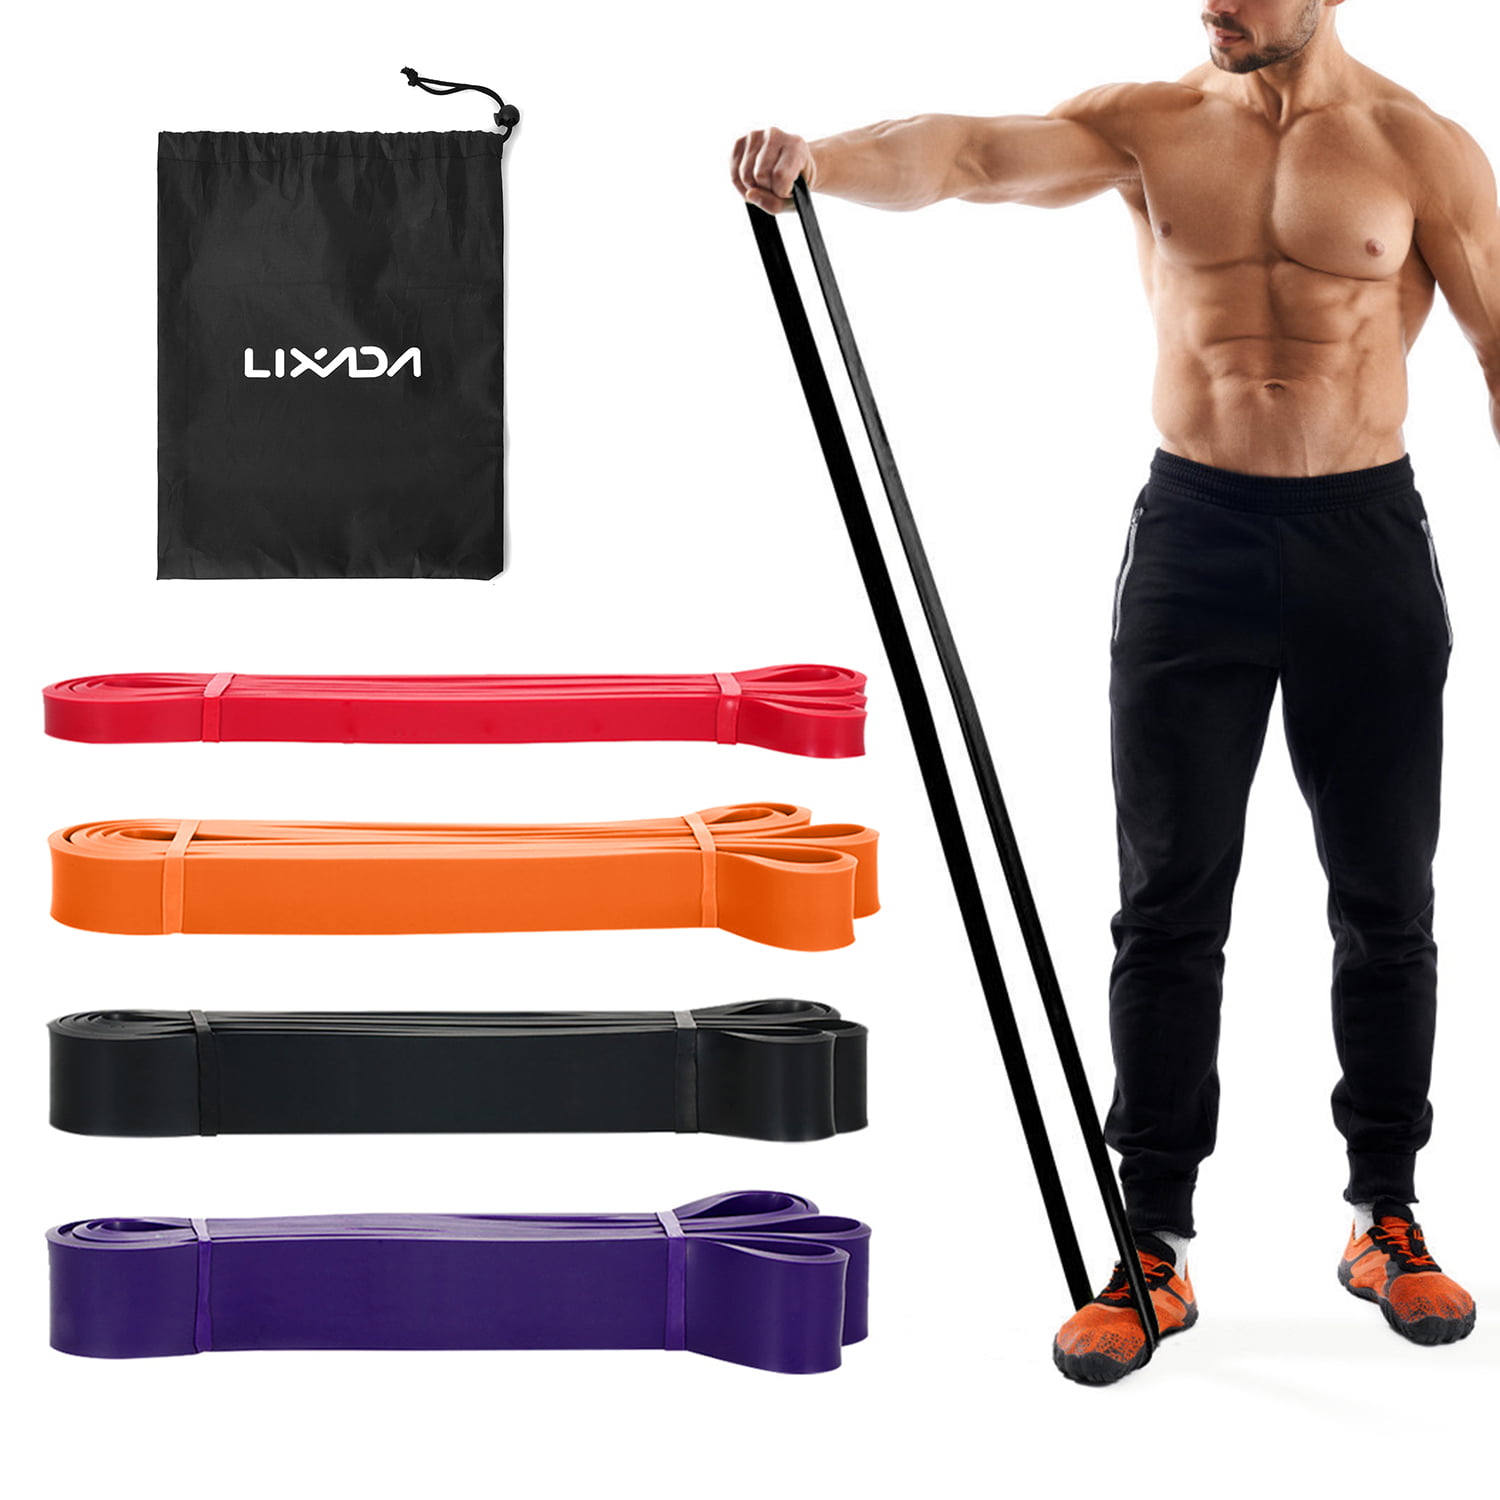 1.125" POWER STRENGTH RESISTANCE LOOP WORKOUTZ ASSISTED PULL UP BAND 